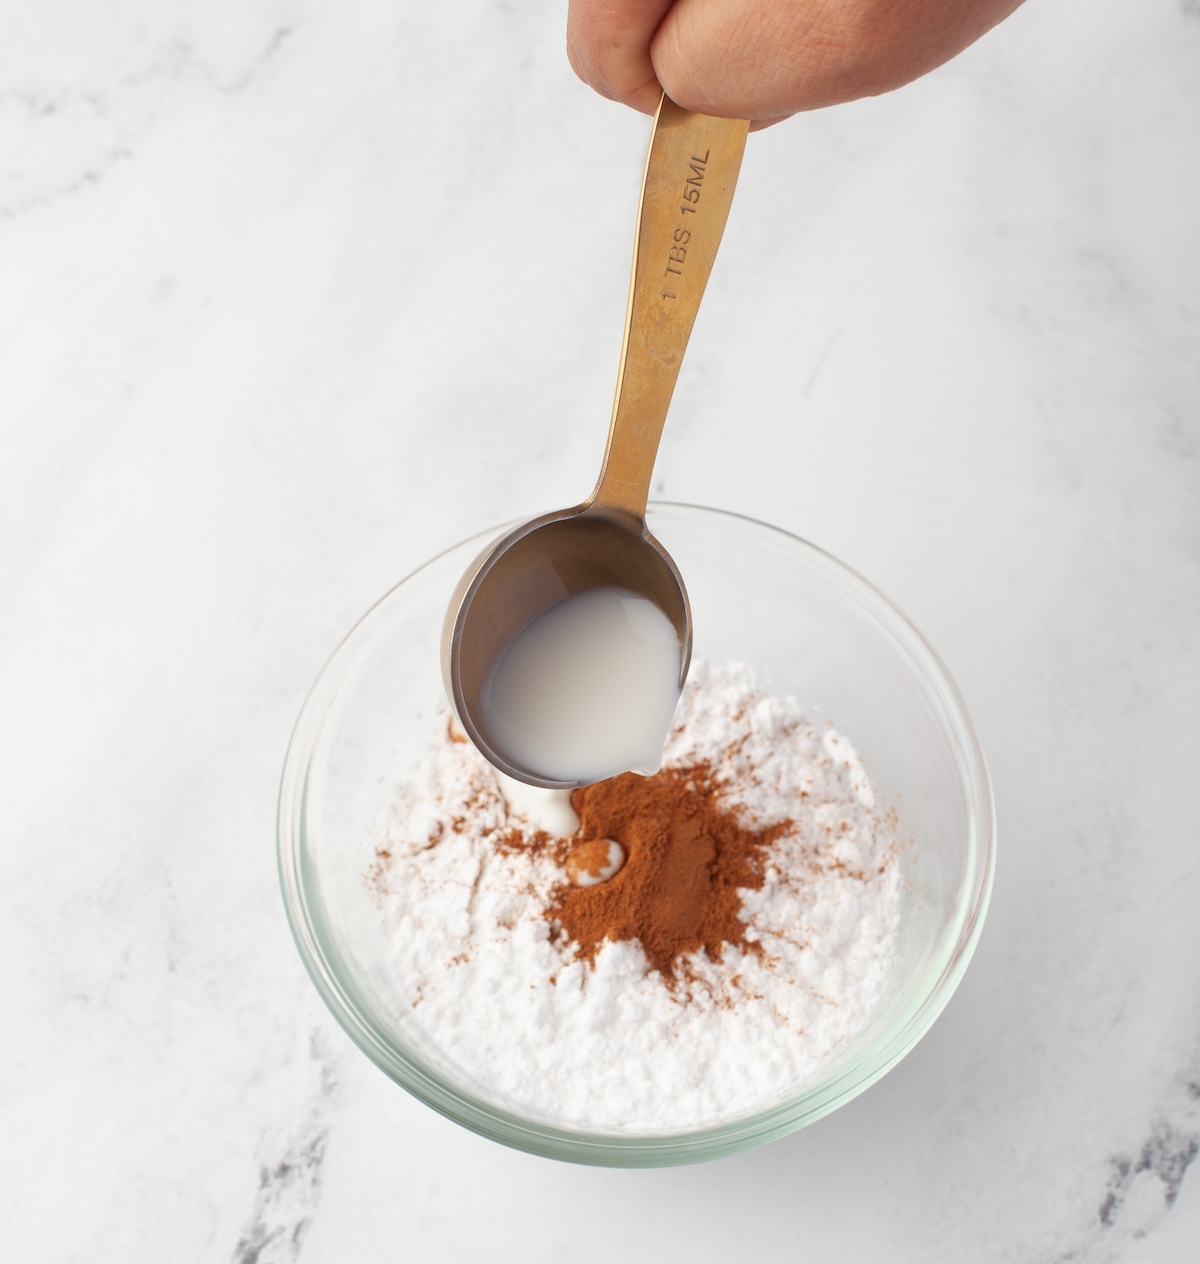 Combining the confectioners sugar with cinnamon and cream in a small bowl